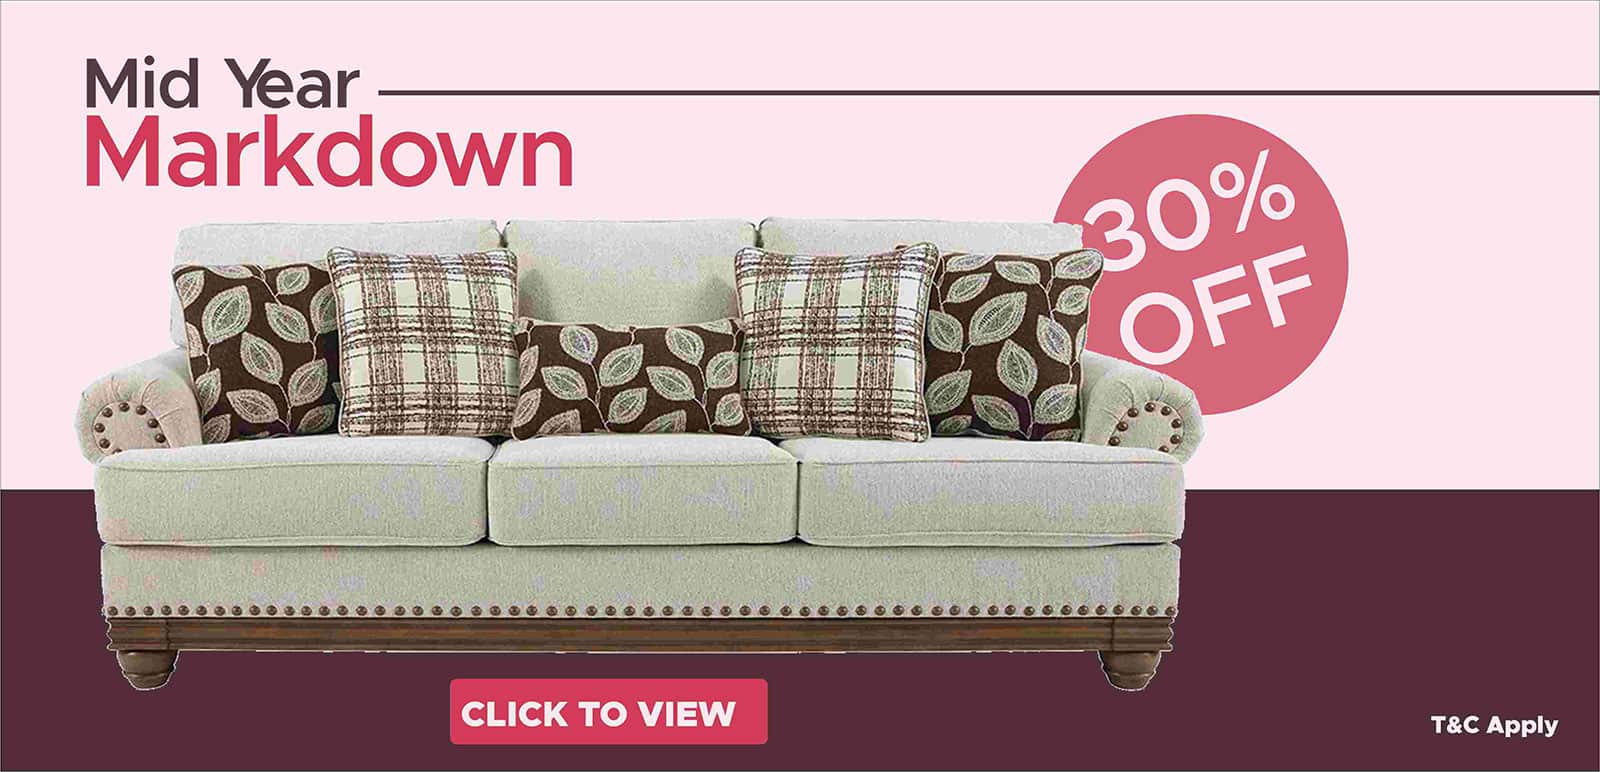 Mid Year markdown click to view